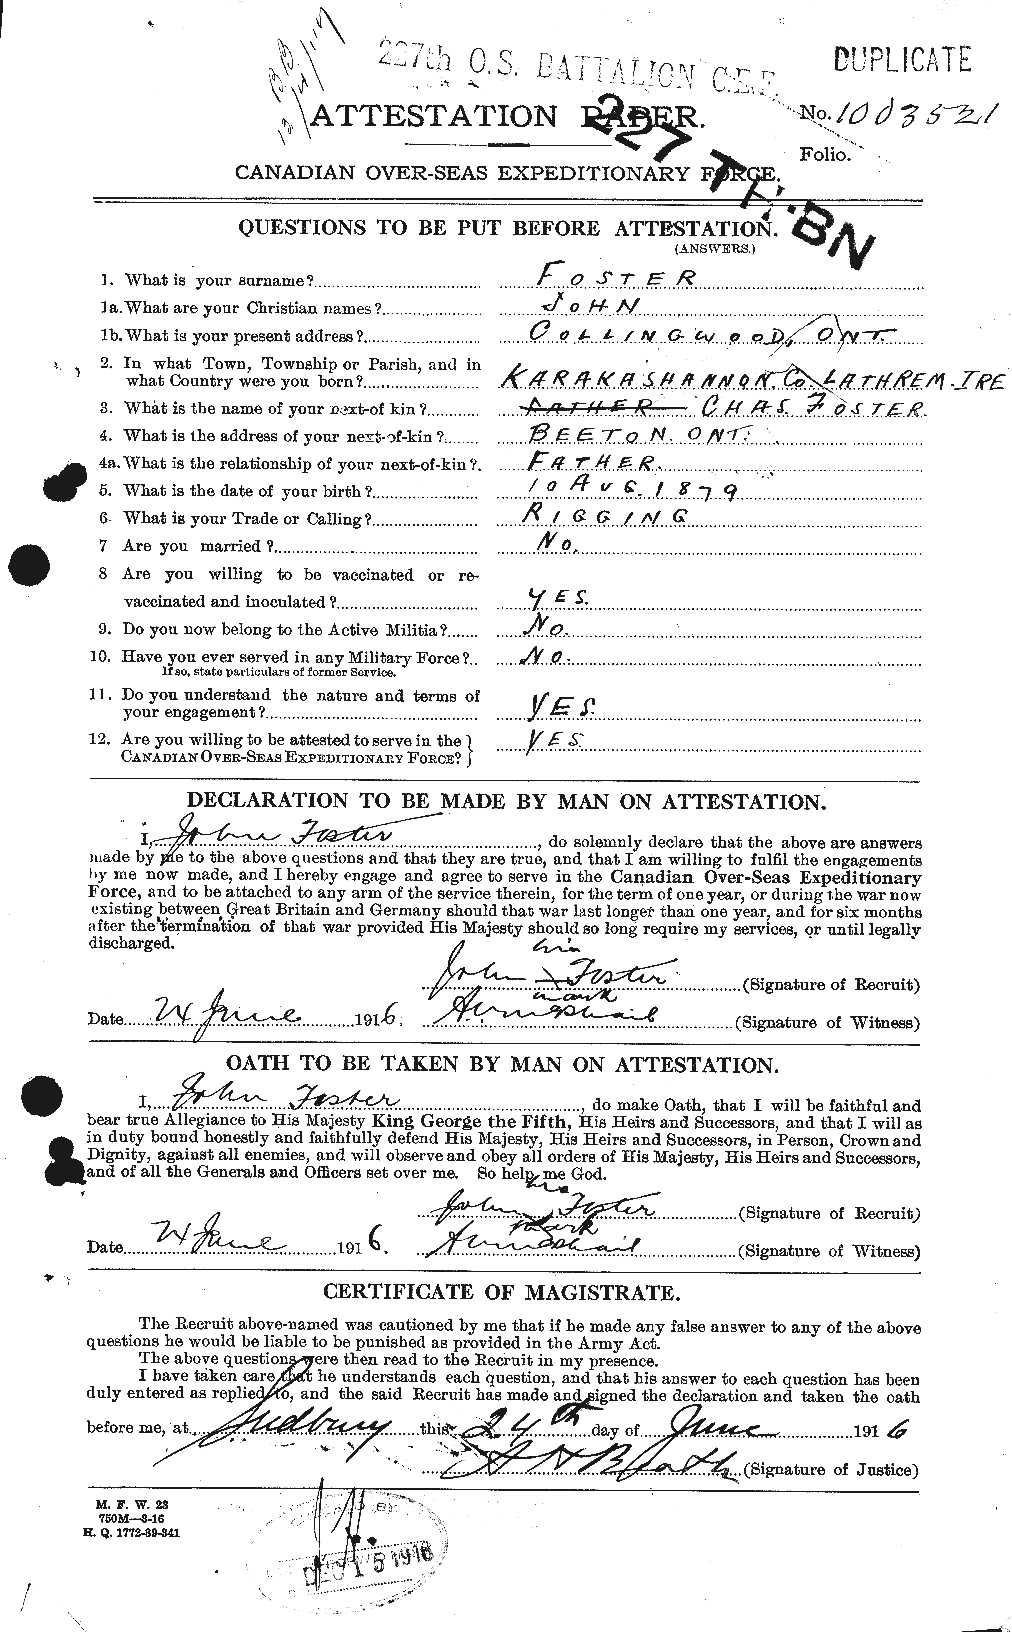 Personnel Records of the First World War - CEF 333324a